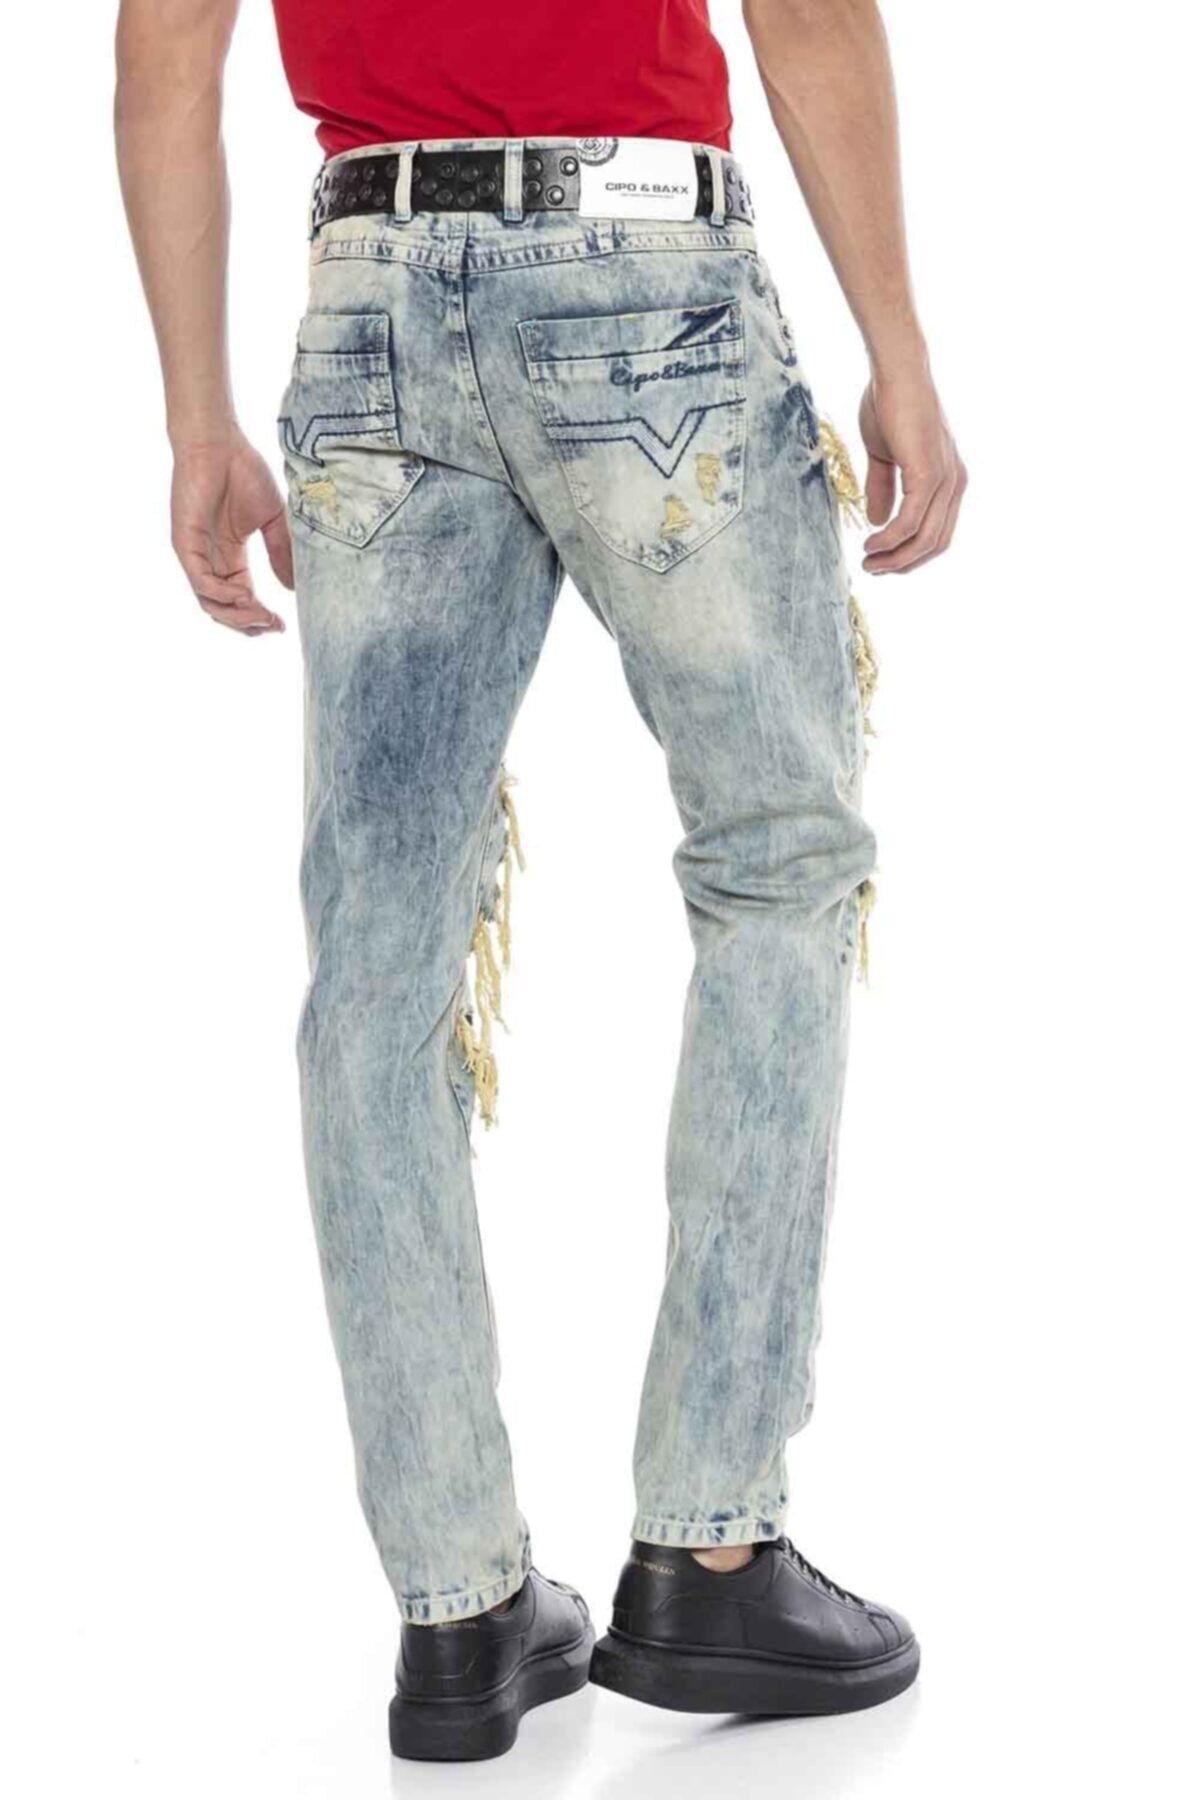 CD337 men's comfortable jeans with destroyed elements